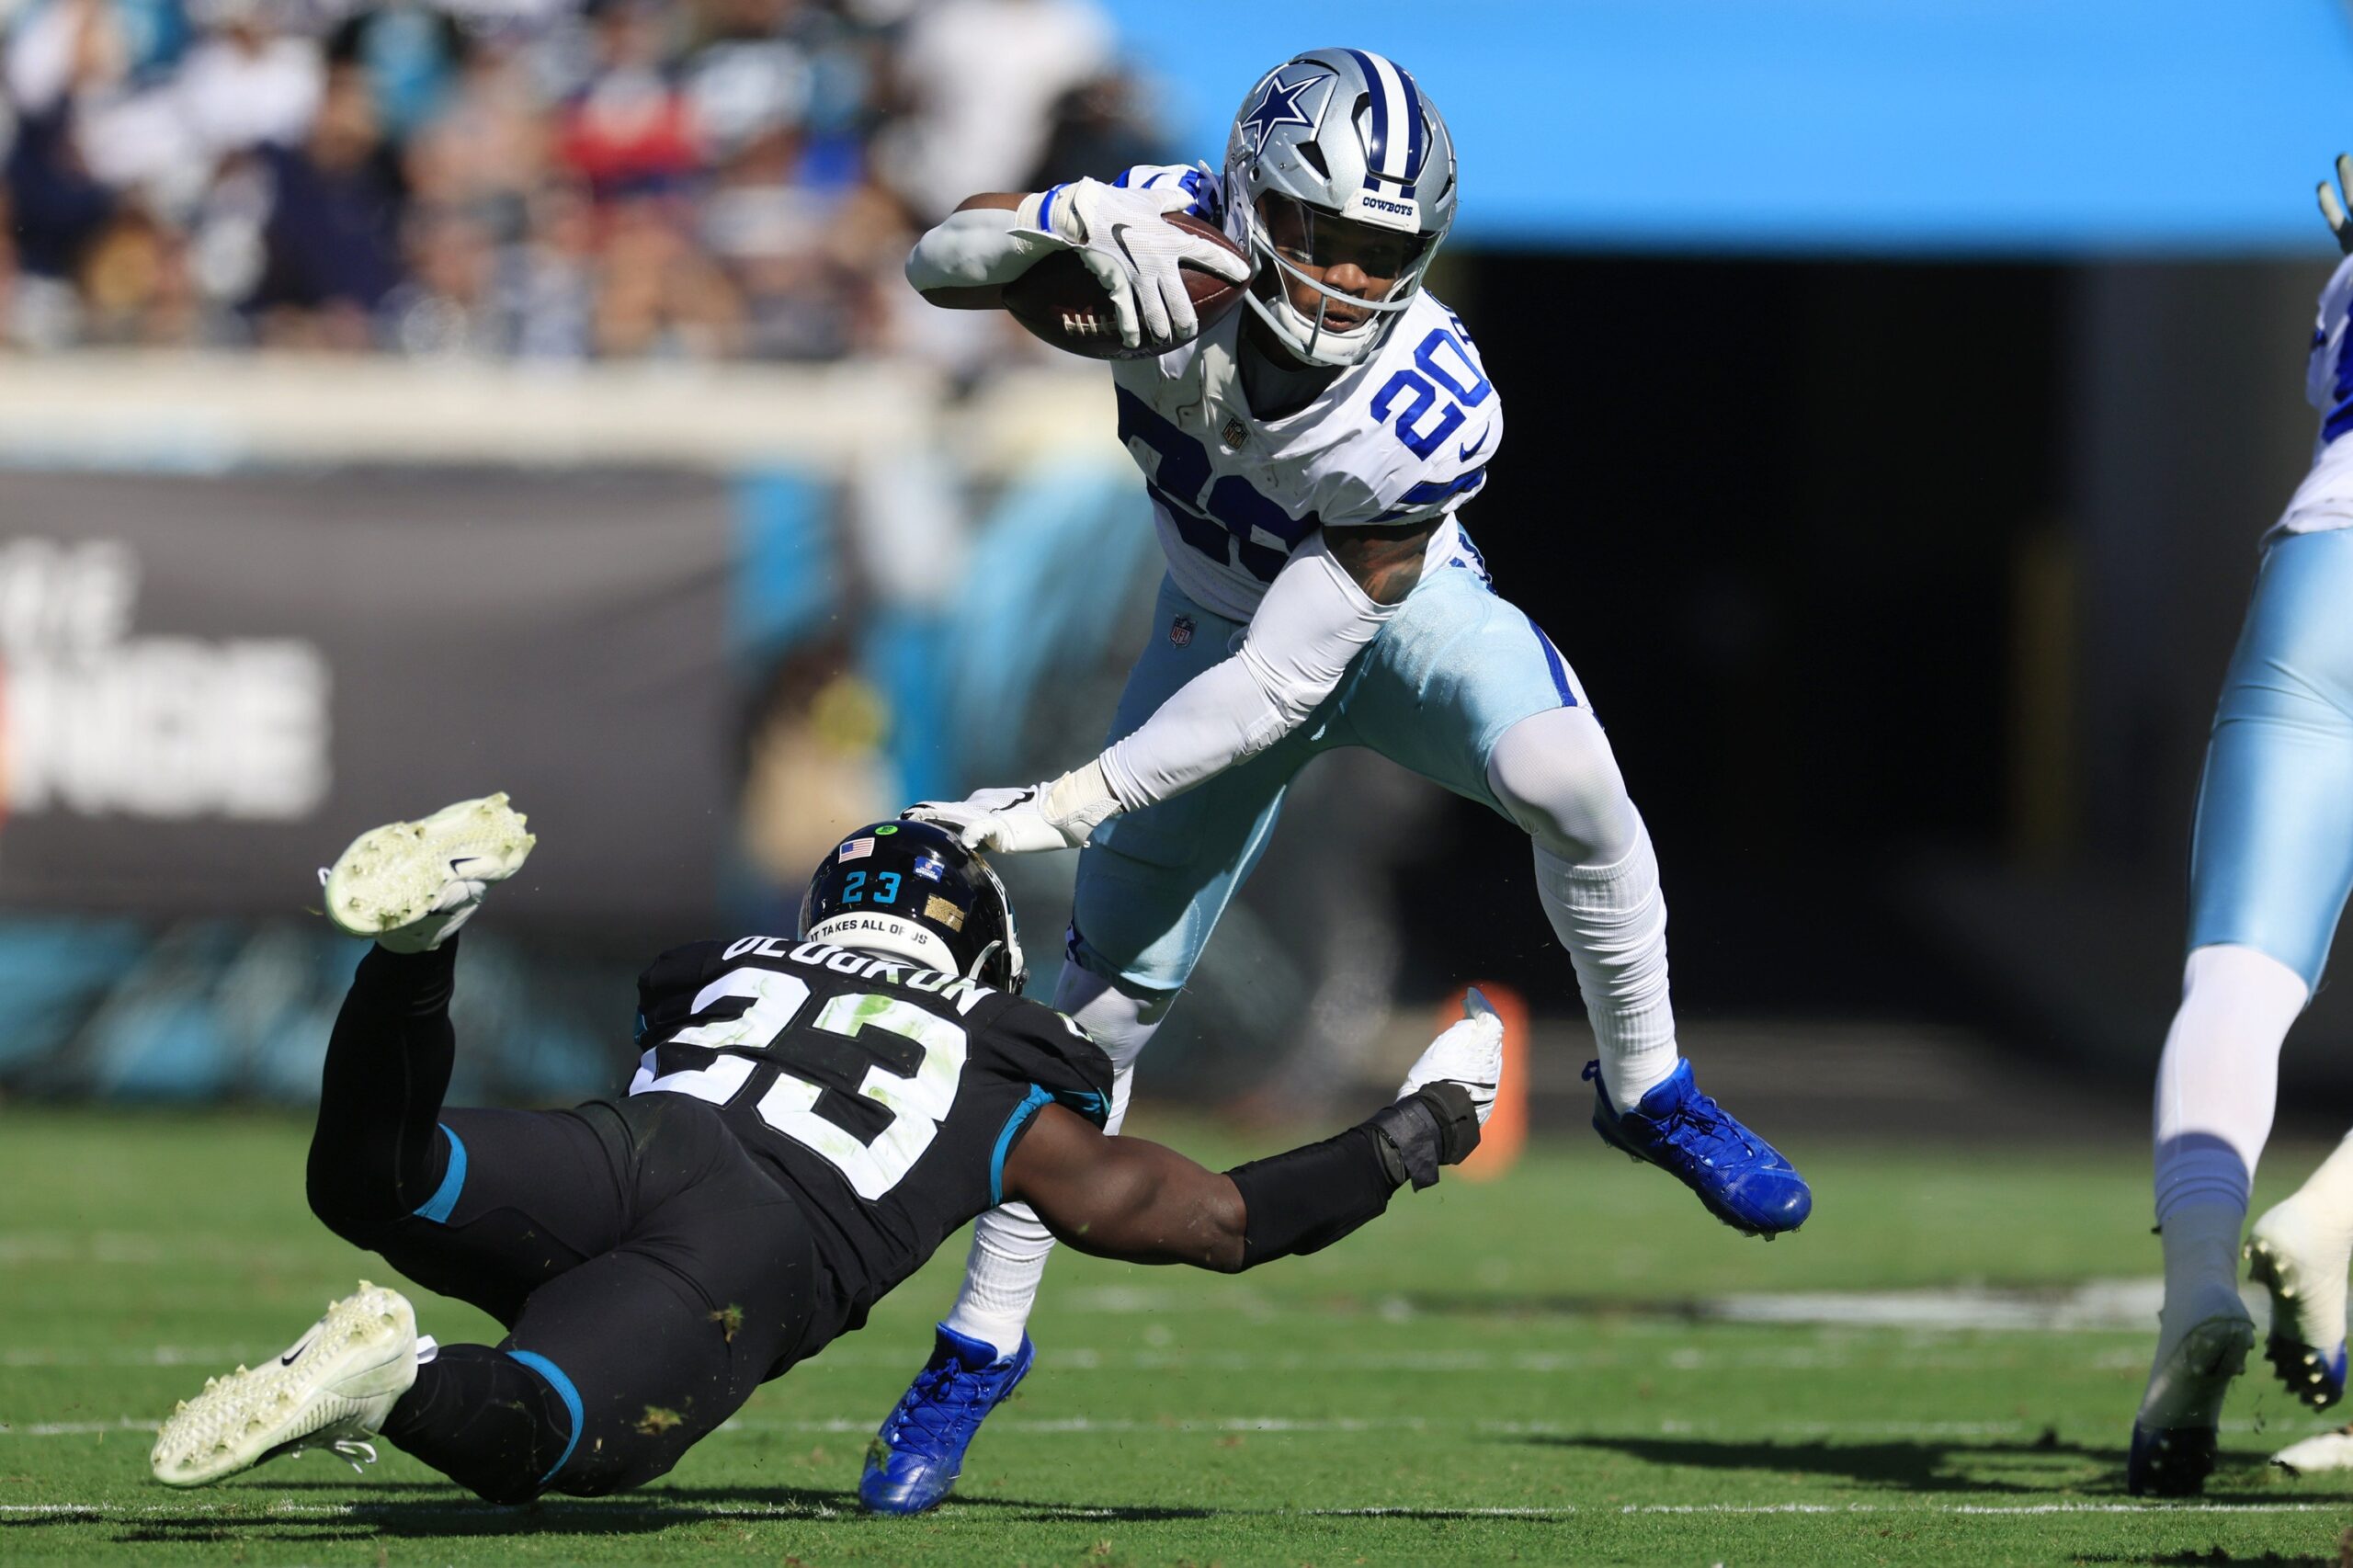 2021 Fantasy Football Best Ball: Positional ADP Values - Fantasy Six Pack